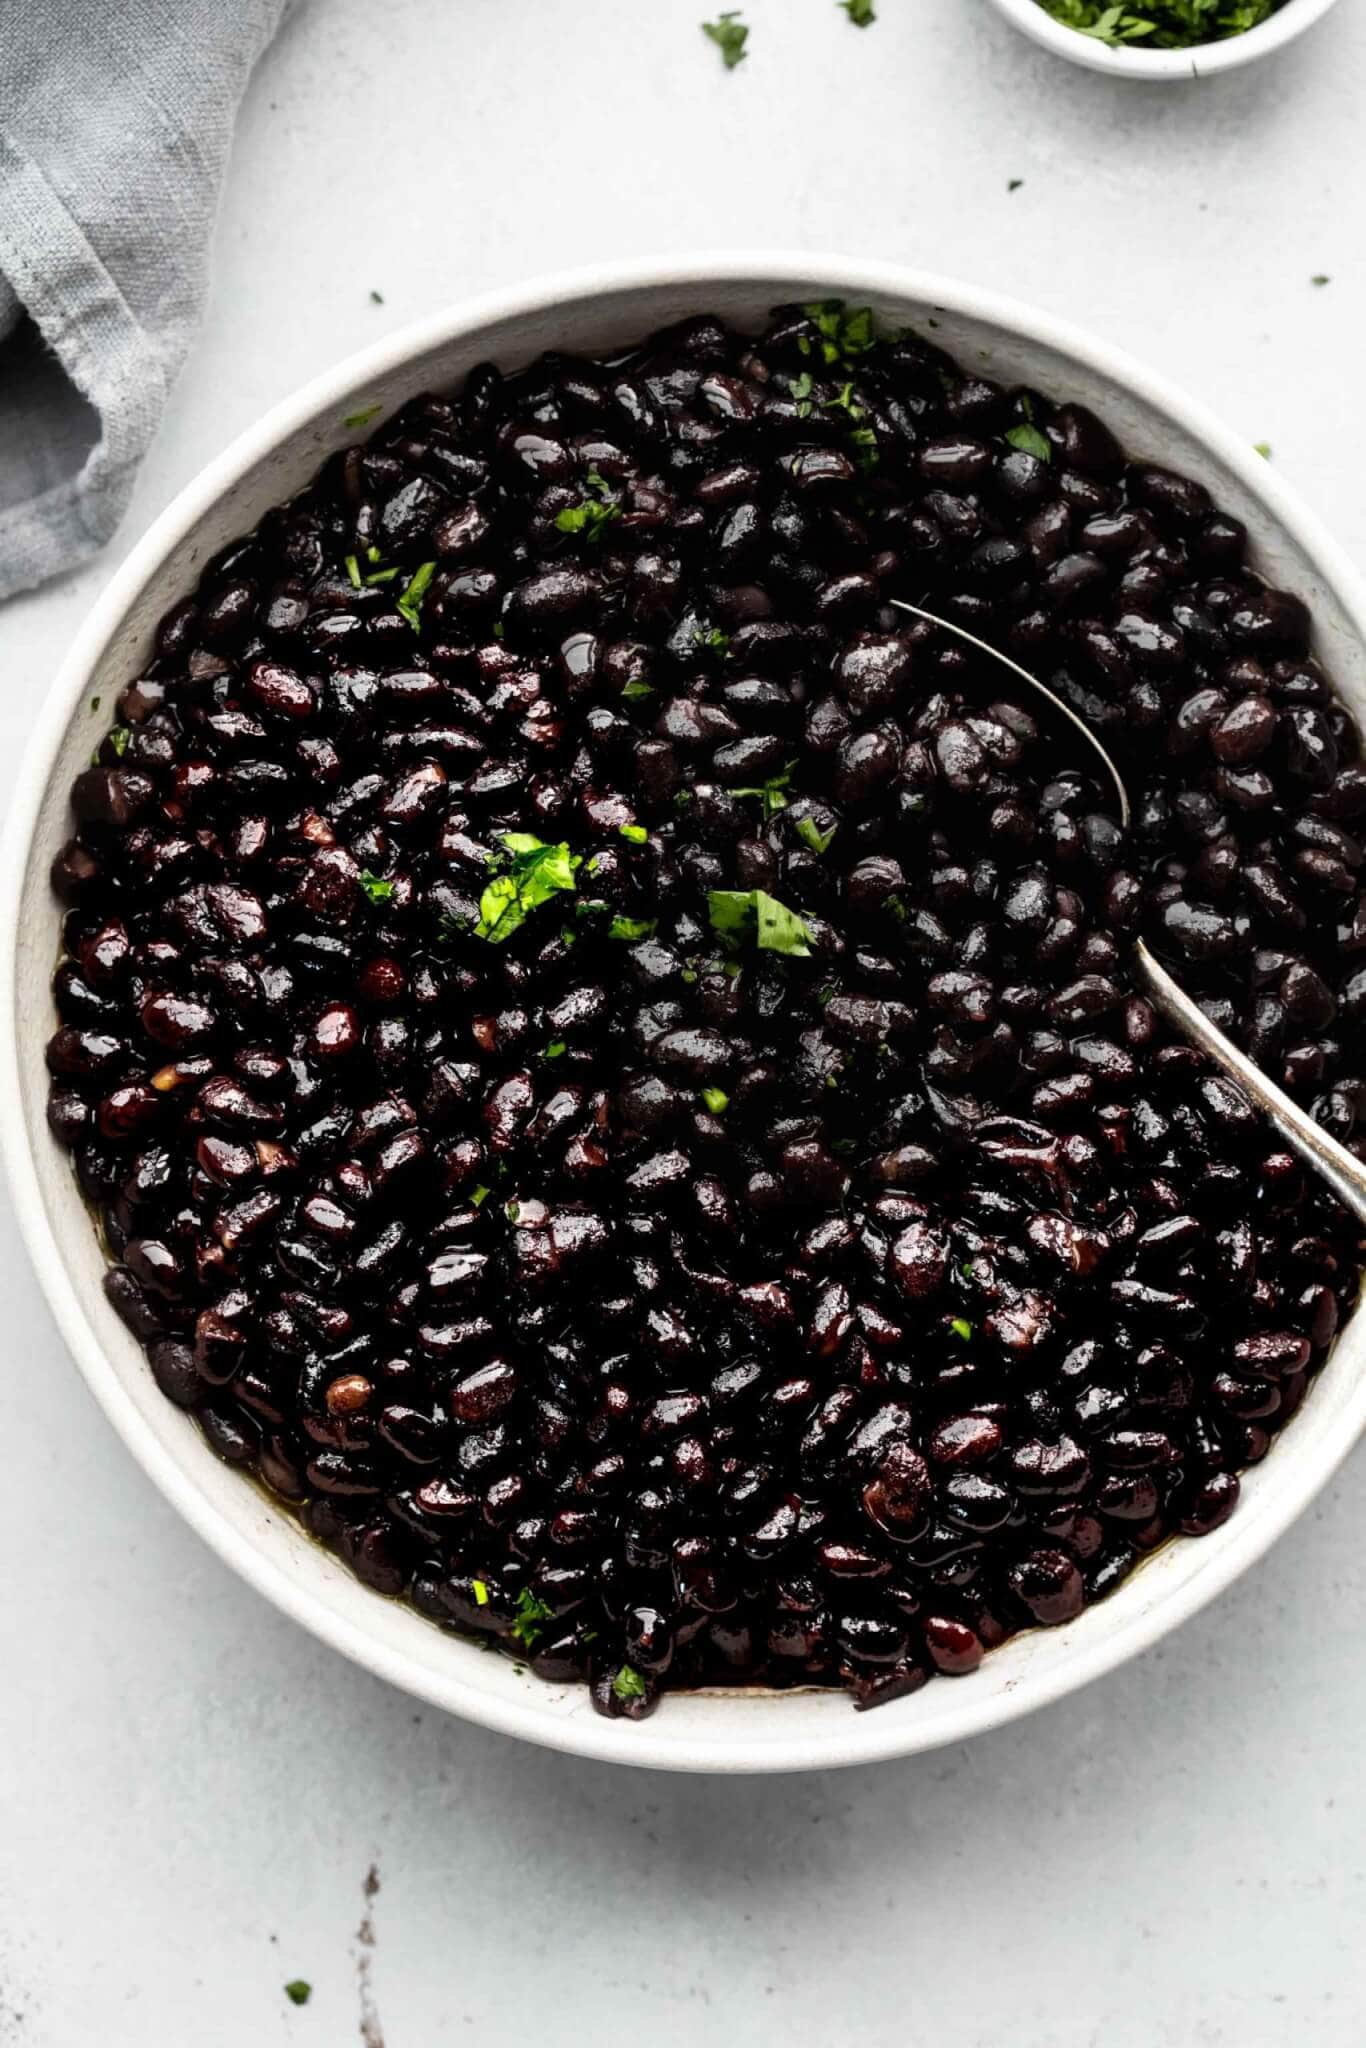 Top shot of black beans in large white bowl with spoon